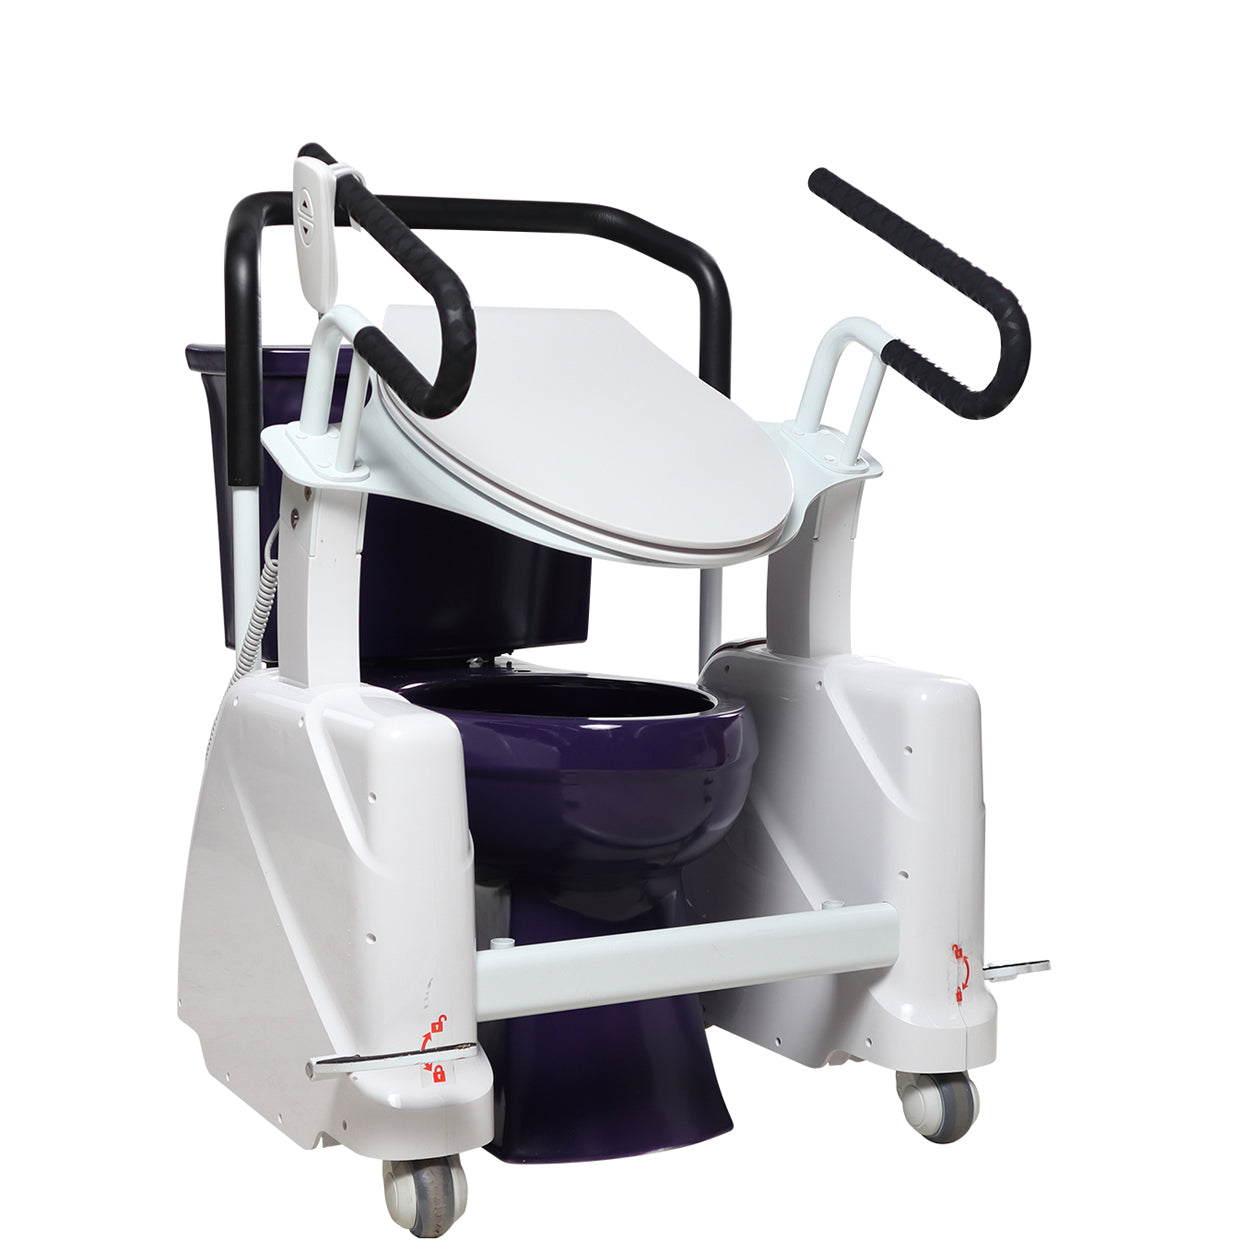 Image of Dignity Lifts - Commercial Toilet Lift - CL1 - In Stock, Ships Now